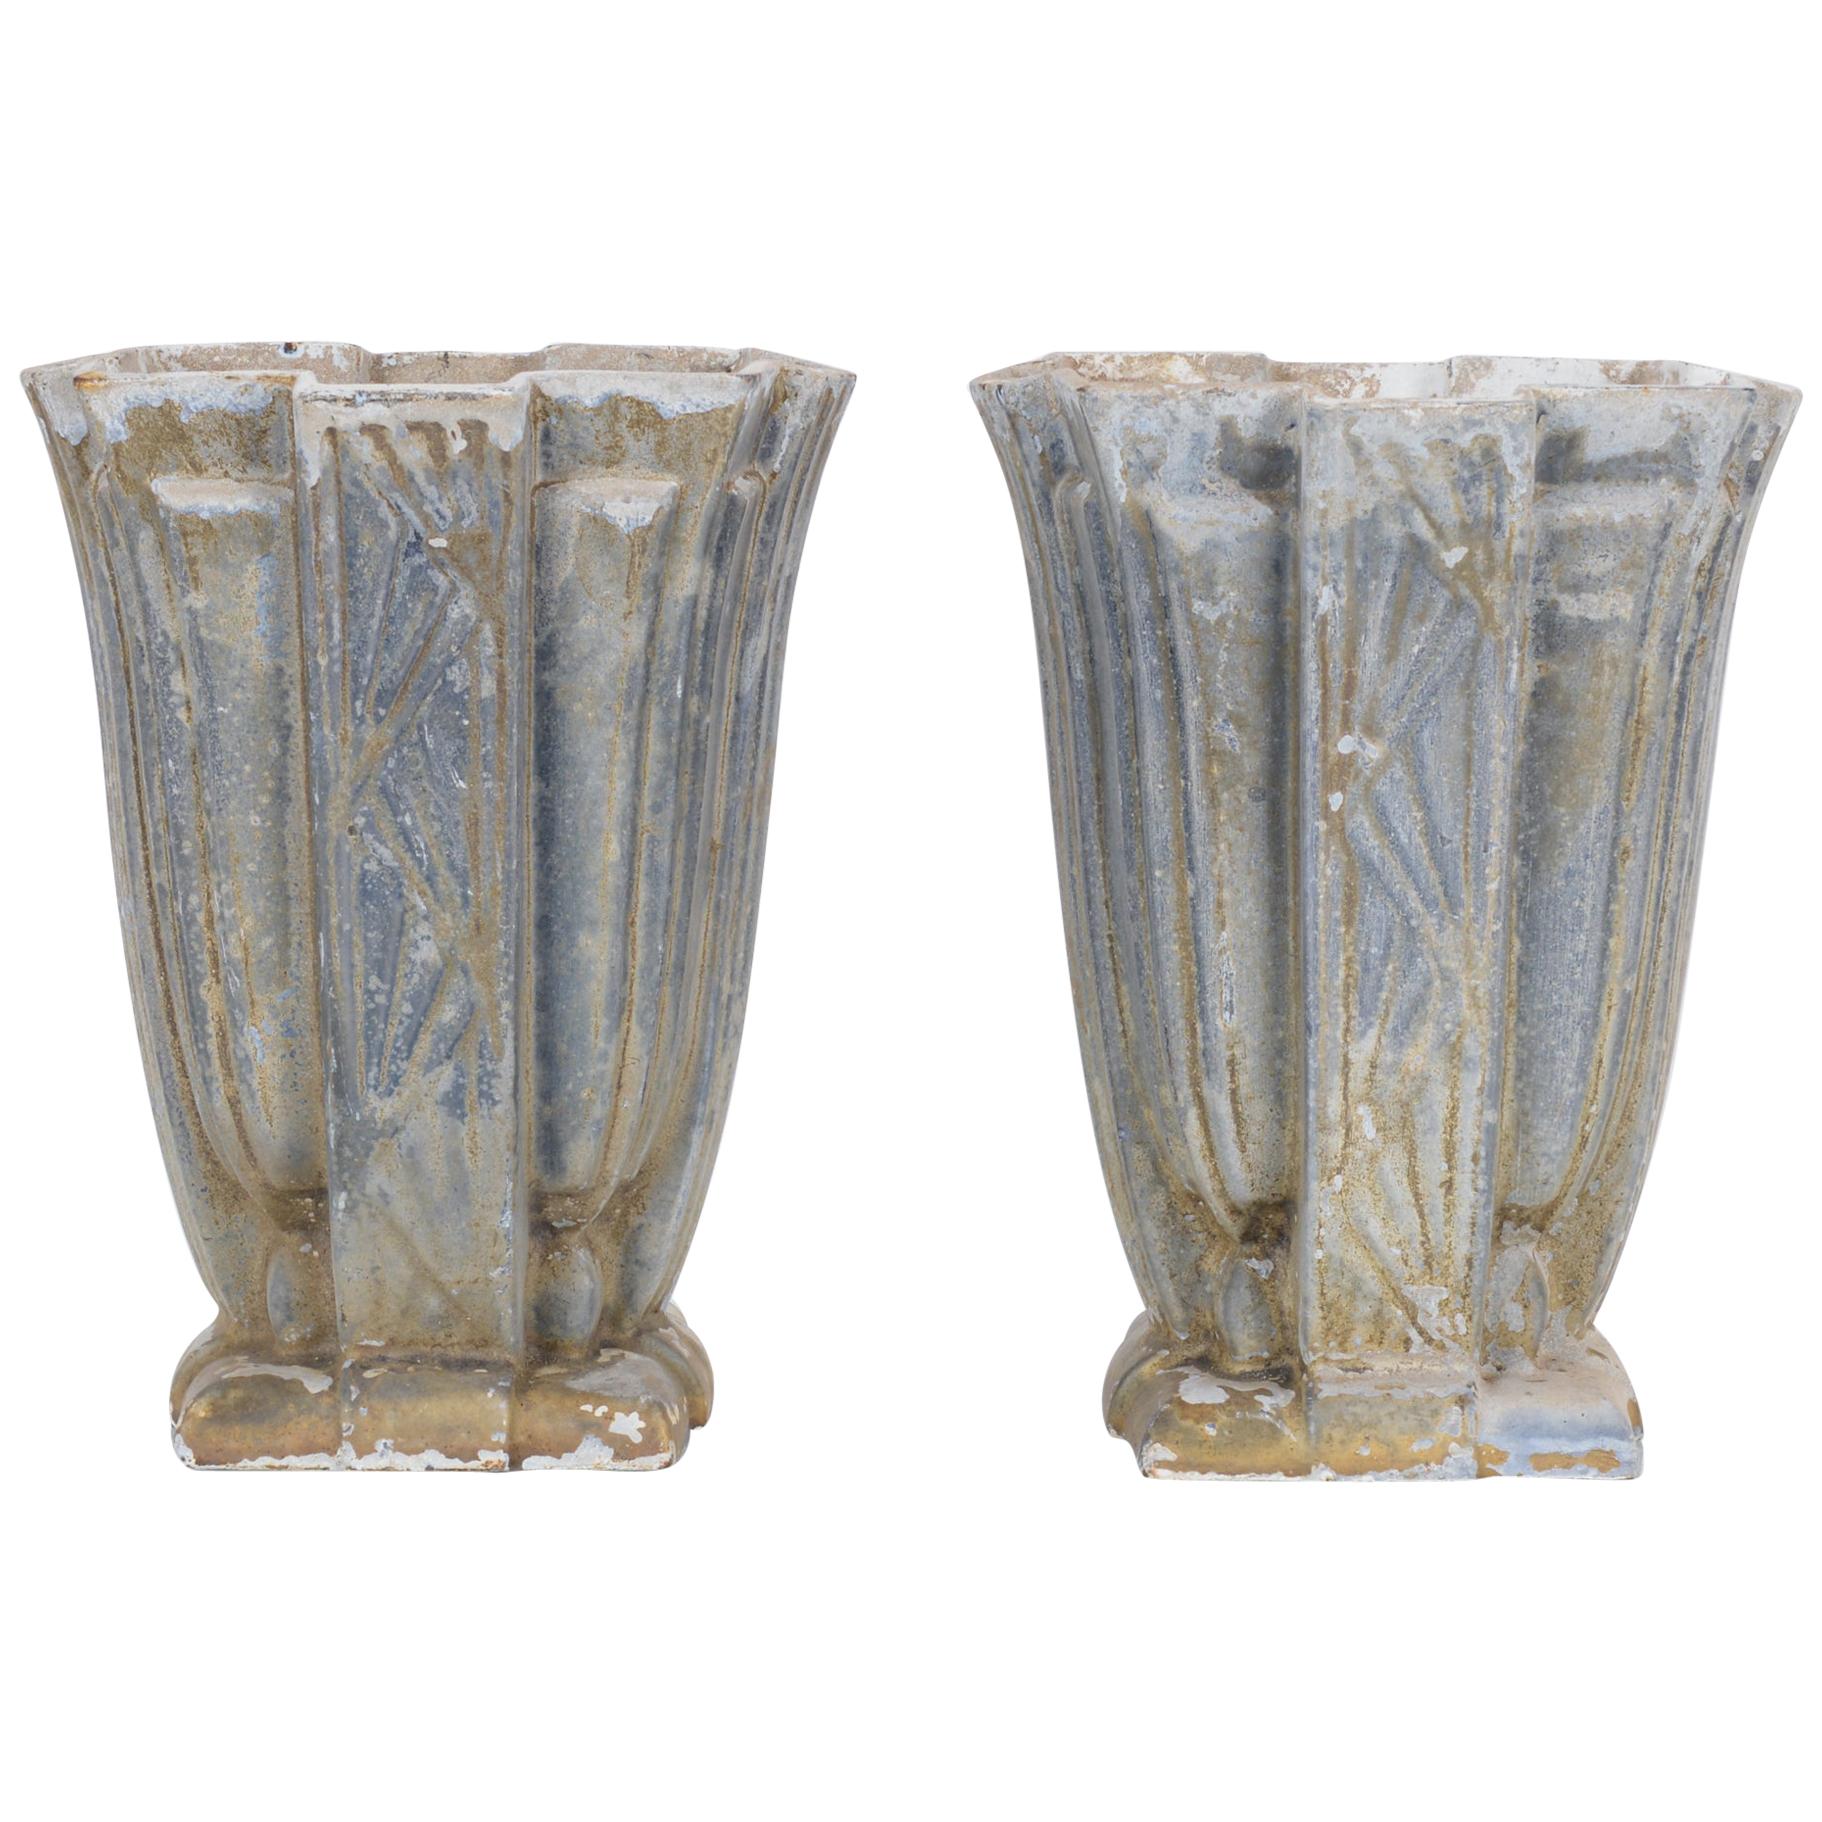 Early 20th Century French Cast Iron Planters, a Pair